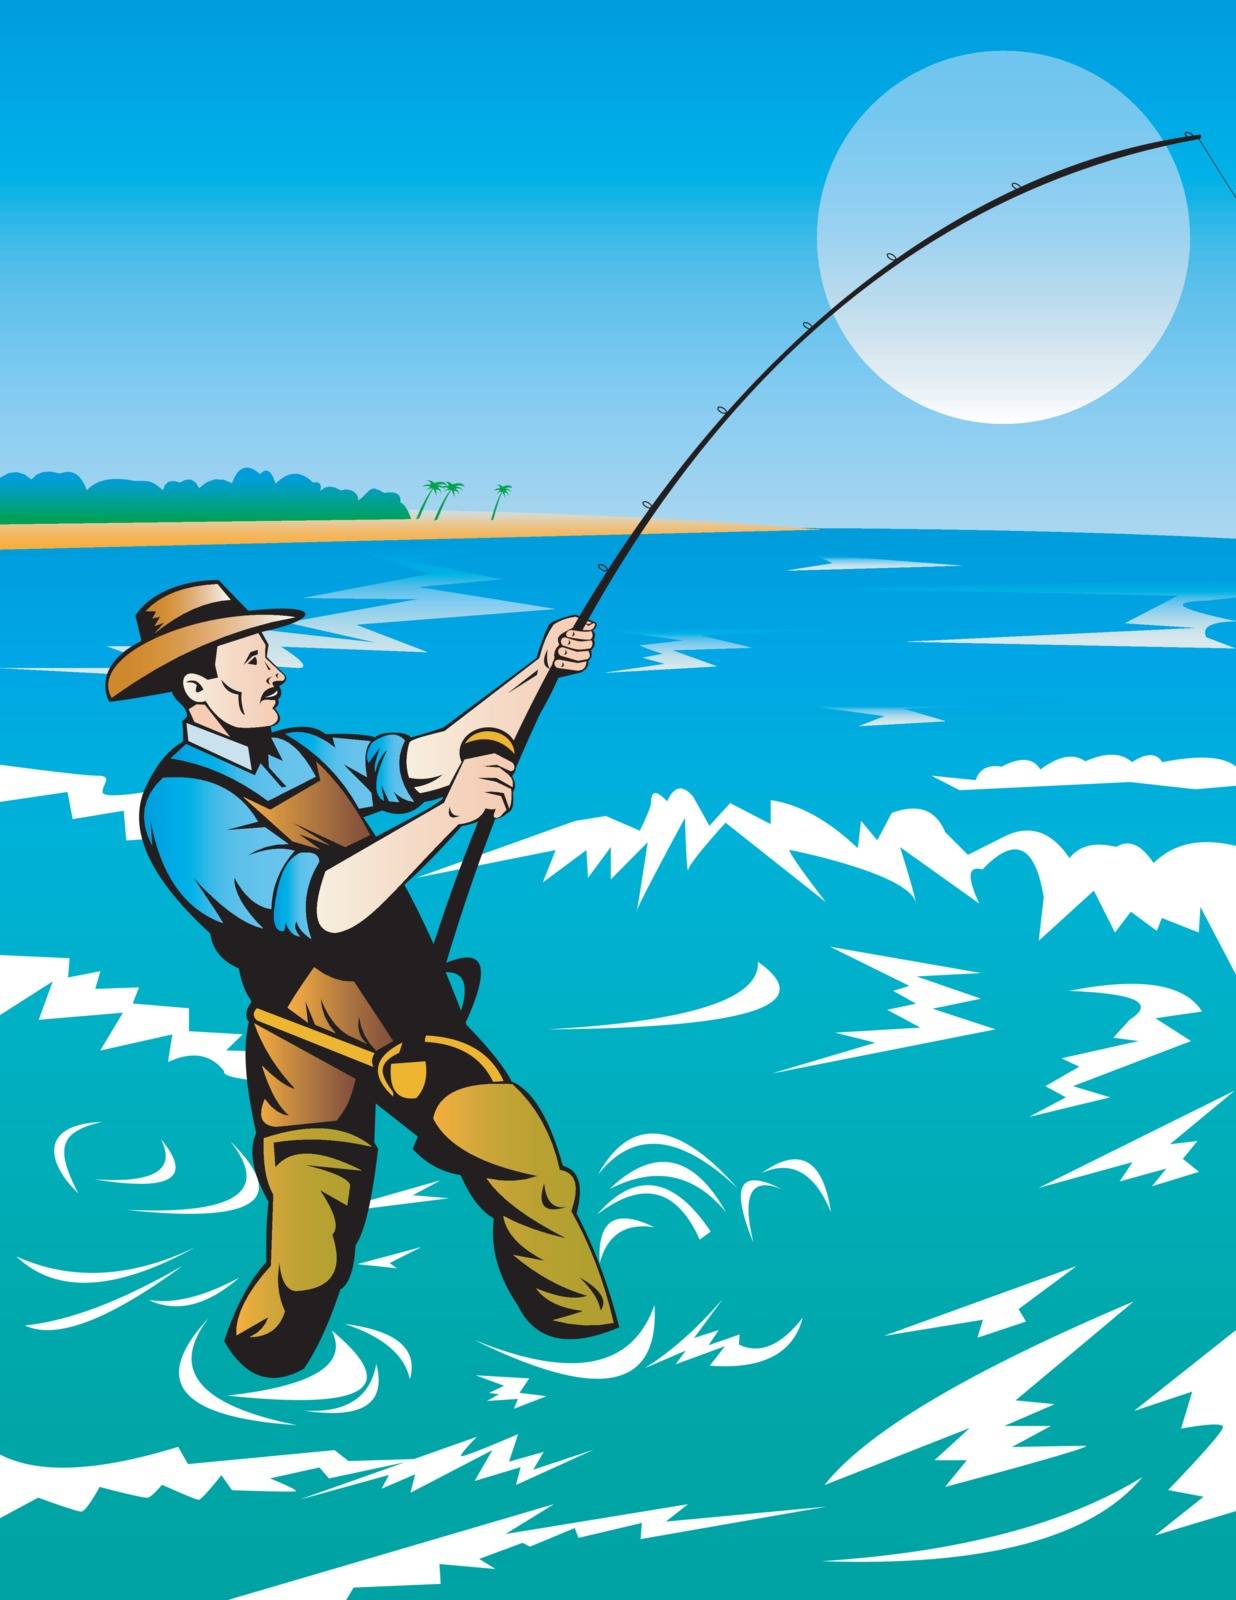 illustration of a fisherman surf casting done in retro style